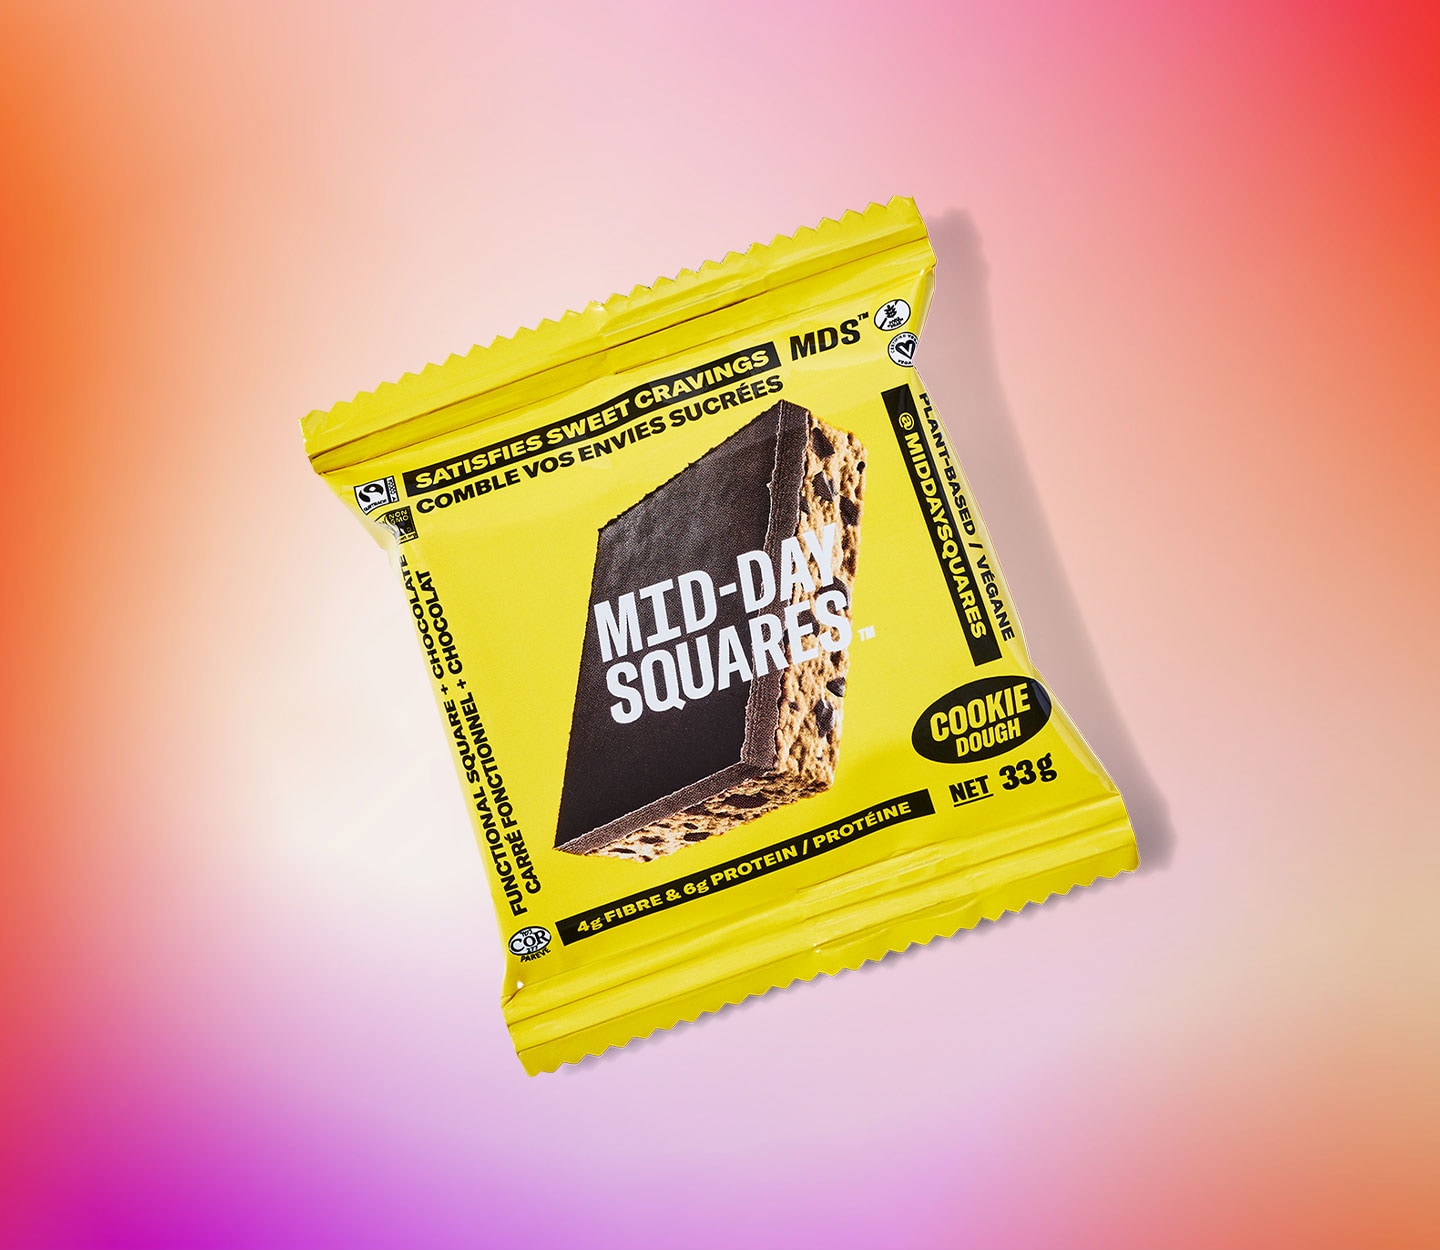 A packaged chocolaty treat that reads Mid-day squares.